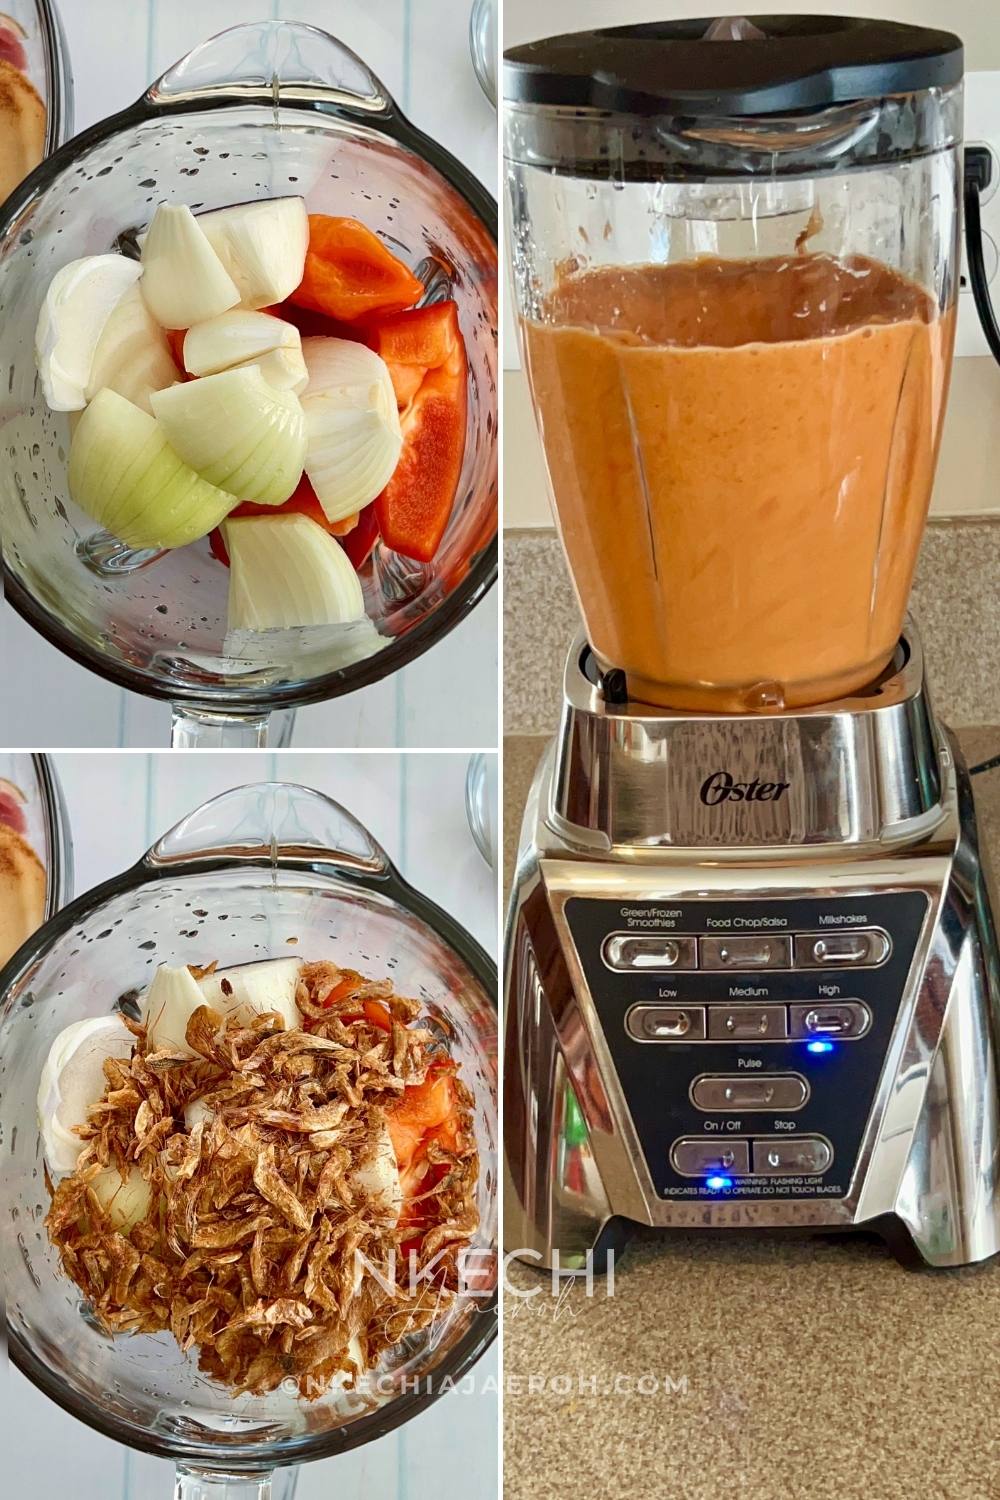 Wash, Cut, and Blend the Vegetables. Wash and cut the bell pepper(s) and onion(s) and add them to your blender. Also, wash the scotch bonnet peppers and add to the blender. Finally, add the dry crawfish to the blender, add water, and blend until smooth.